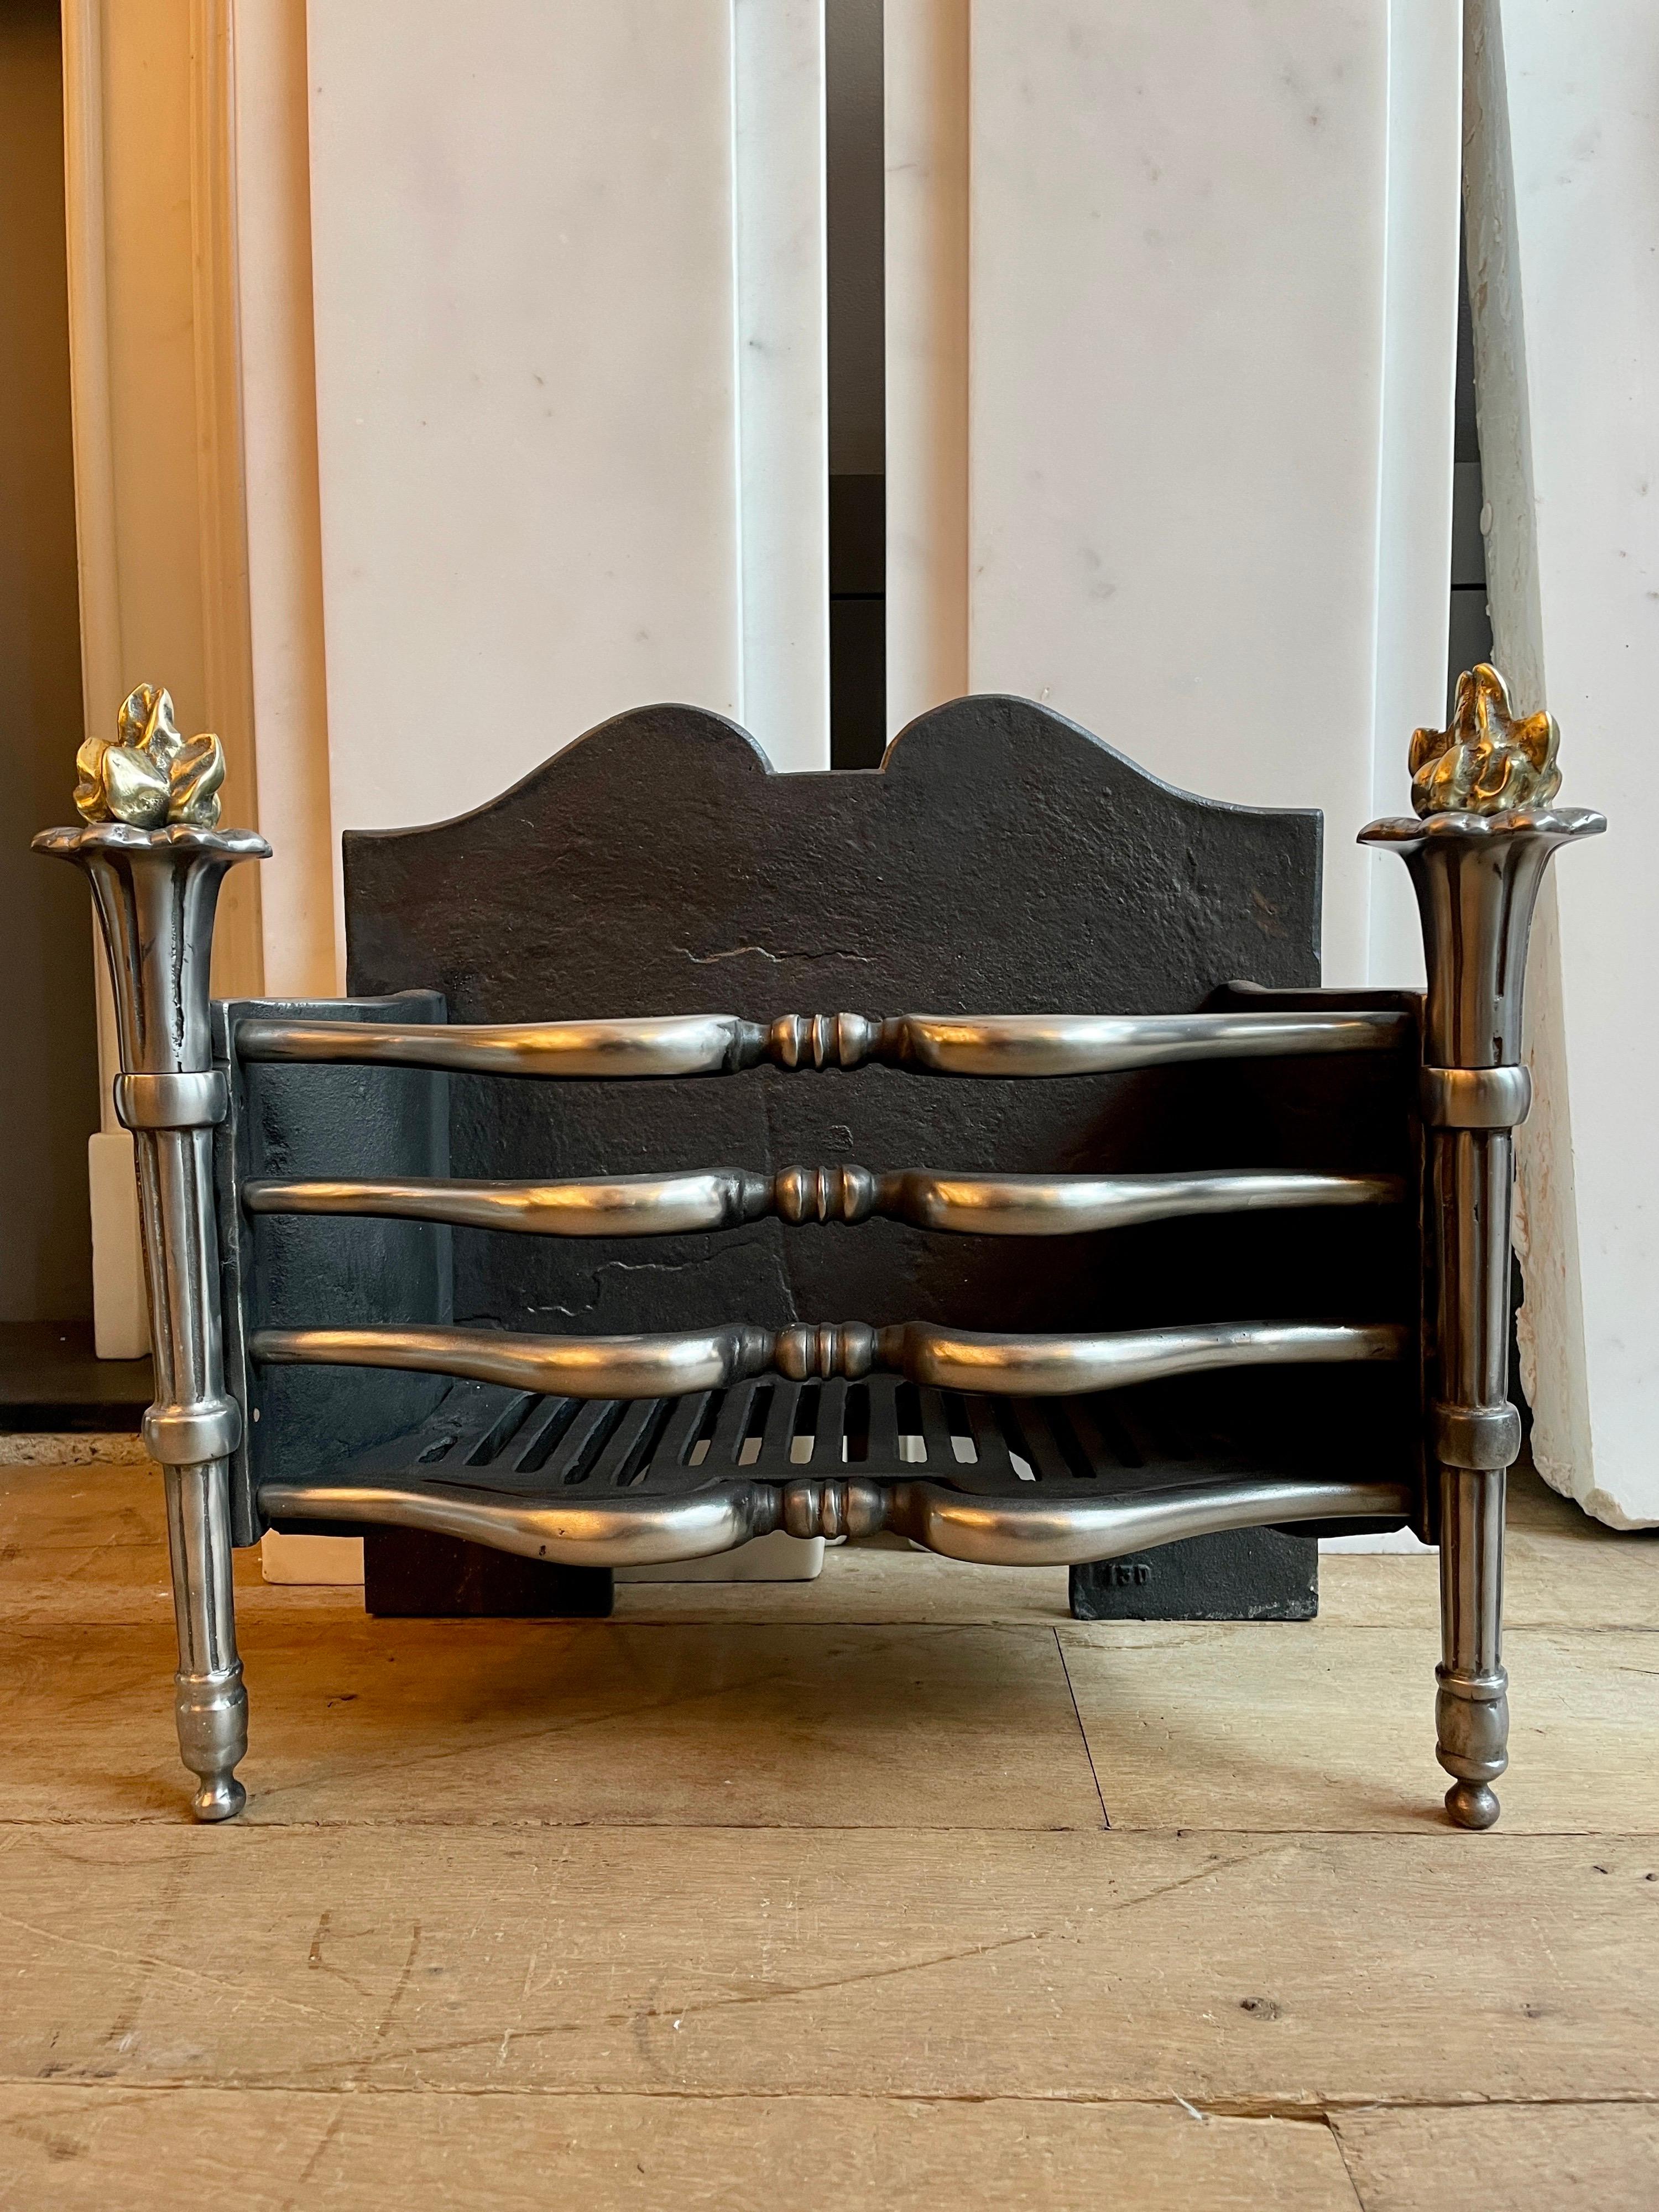 A polished wrought iron fire grate in the regency manner, with 4 shaped bars and torchere supports with brass flame finials. English, early 20th century.